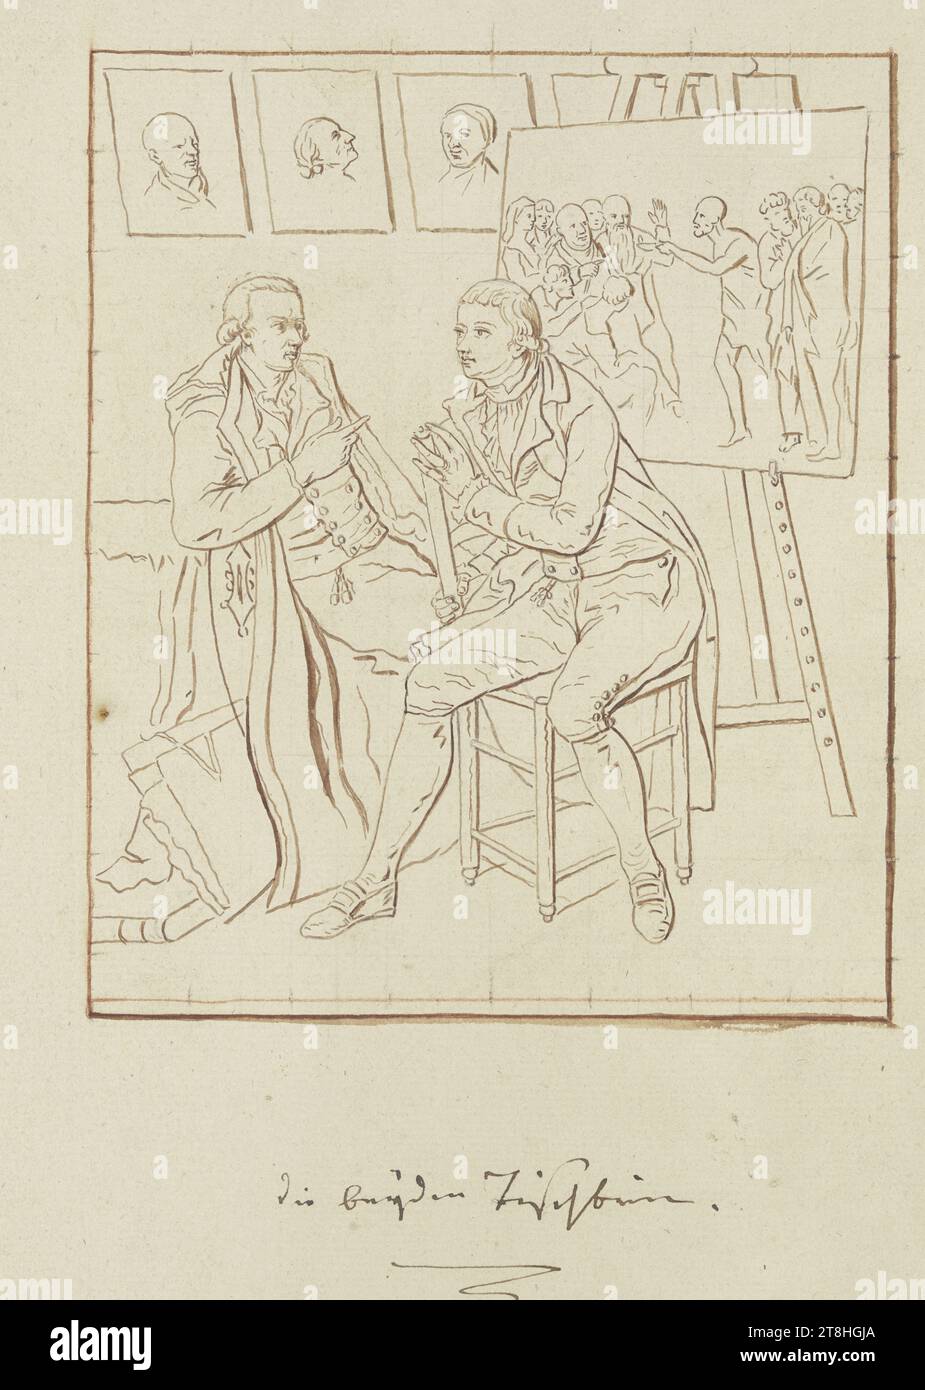 JOHANN HEINRICH WILHELM TISCHBEIN, 'One painted the other.' The artist with his brother Heinrich Jacob Tischbein in the studio, sheet, 284 x 208 mm, representation, 145 x 120 mm, pen in brown over red chalk and graphite pencil, squared with graphite pencil, border line in brown on all sides, on ribbed handmade paper, 'One the other painted.' The artist with his brother Heinrich Jacob Tischbein in the studio, JOHANN HEINRICH WILHELM TISCHBEIN, 18TH CENTURY, LATE BAROQUE CLASSICISM, DRAWING, brown pen over red chalk and graphite pencil, squared with graphite pencil, border line in brown on all Stock Photo